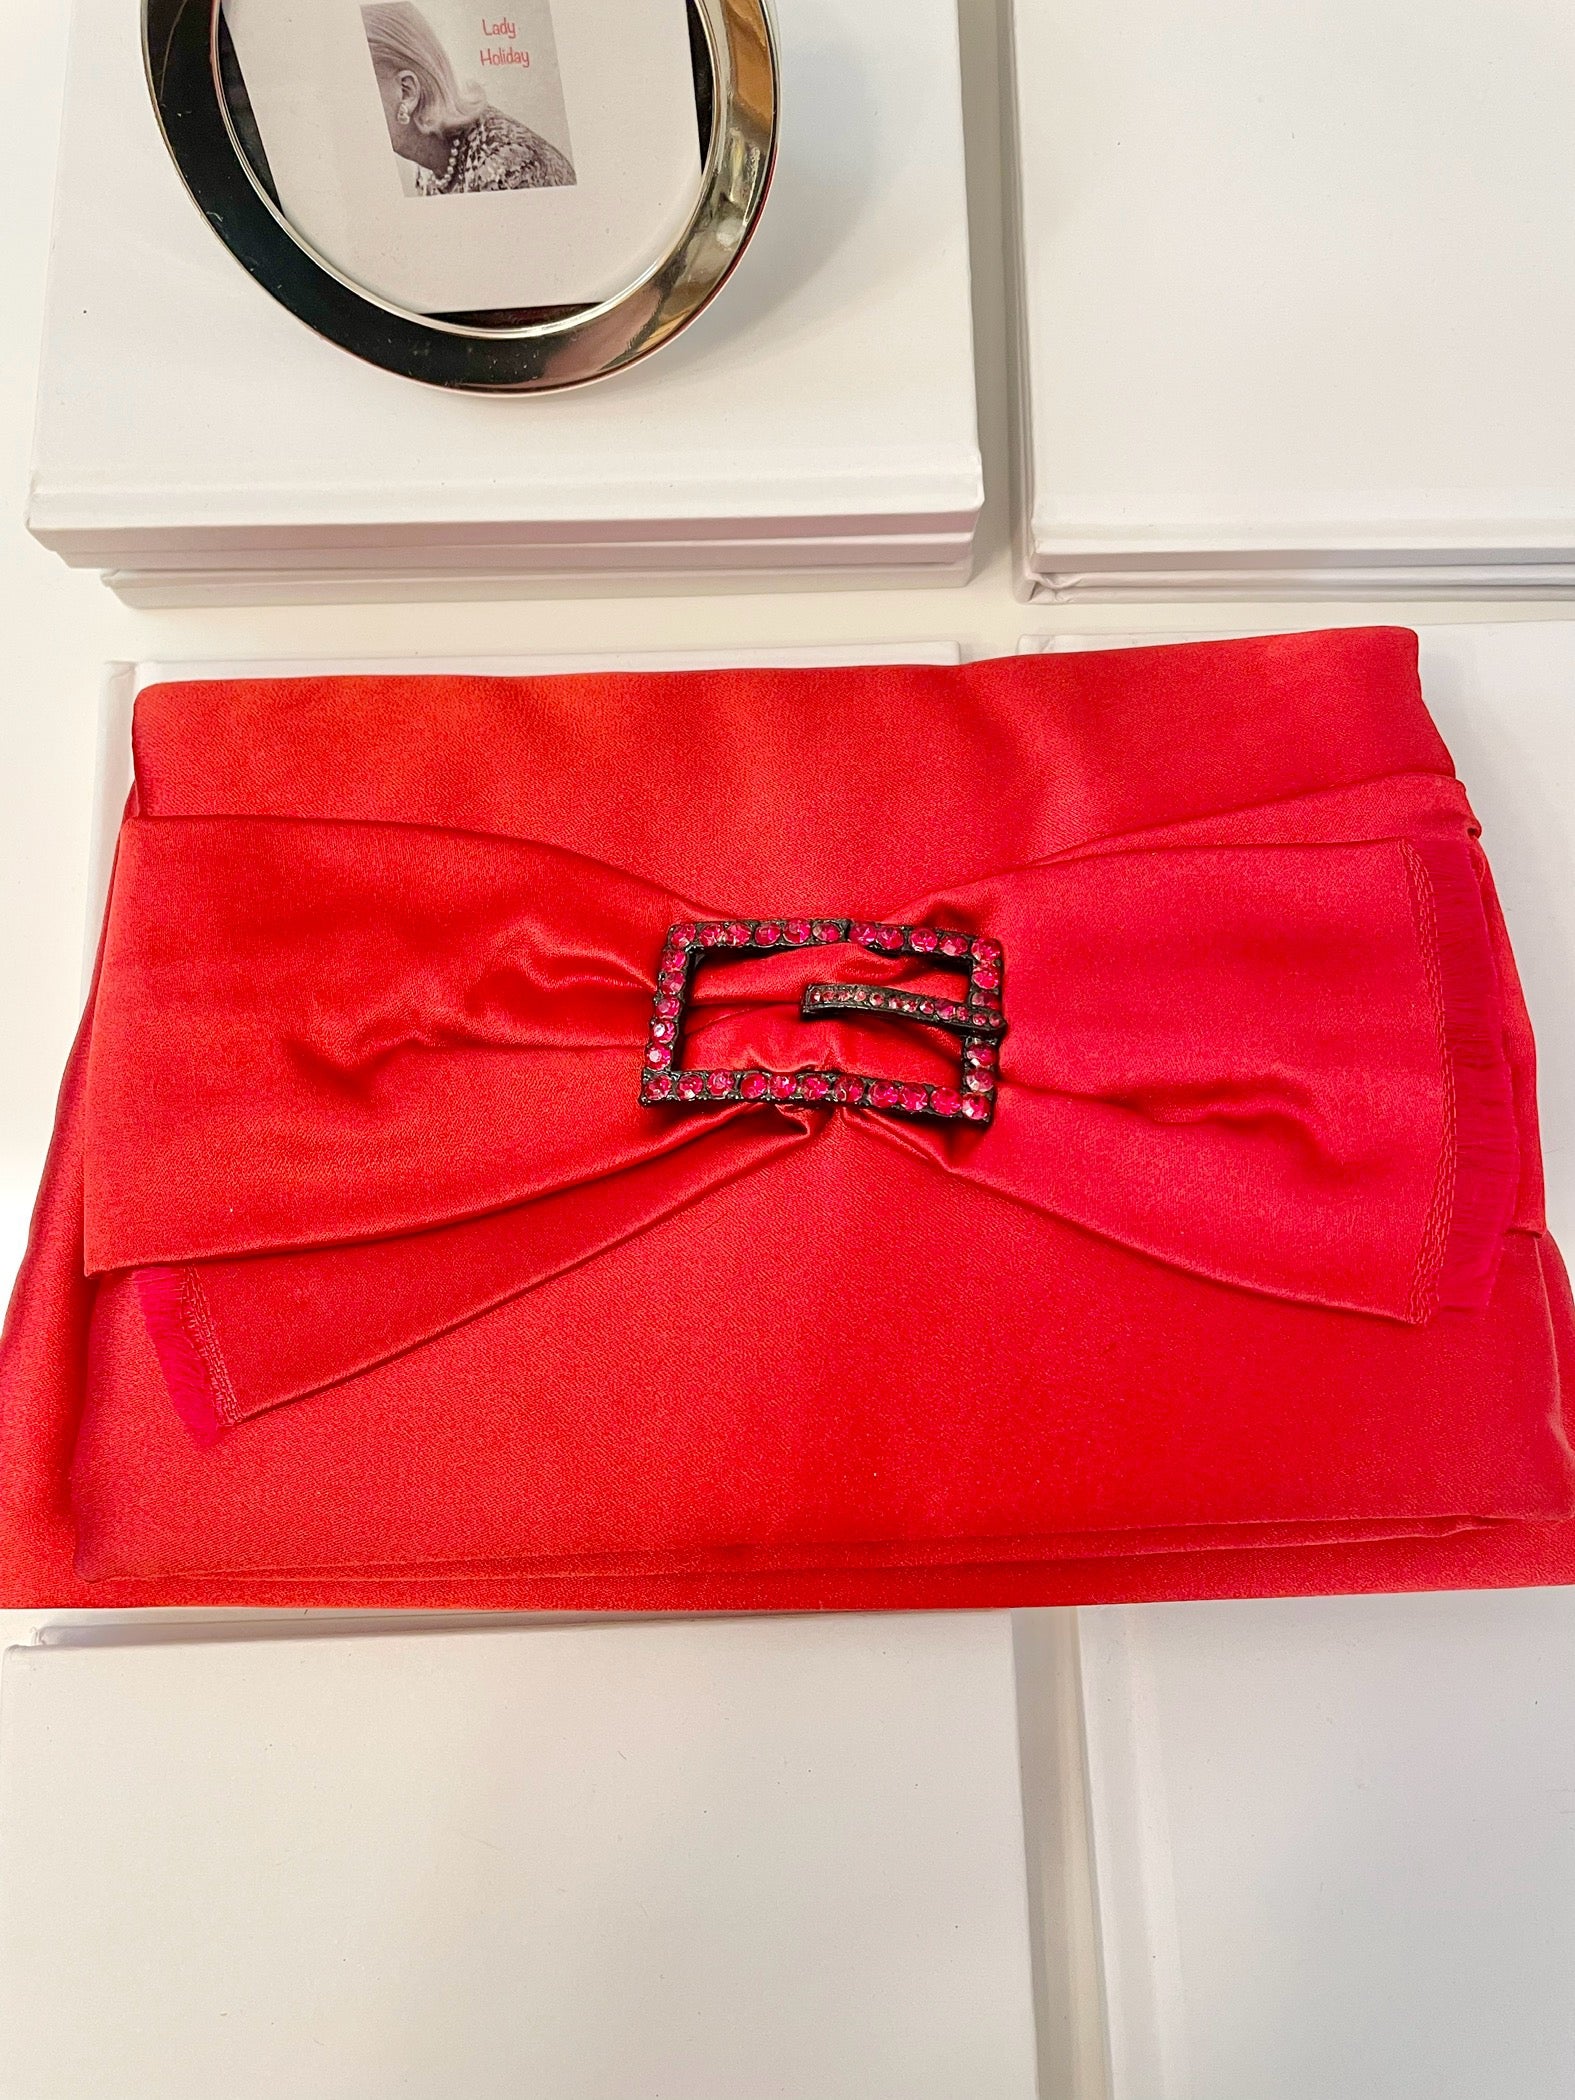 Oh so elegant red satin bow bag, dusted with red crystals.....extraordinary